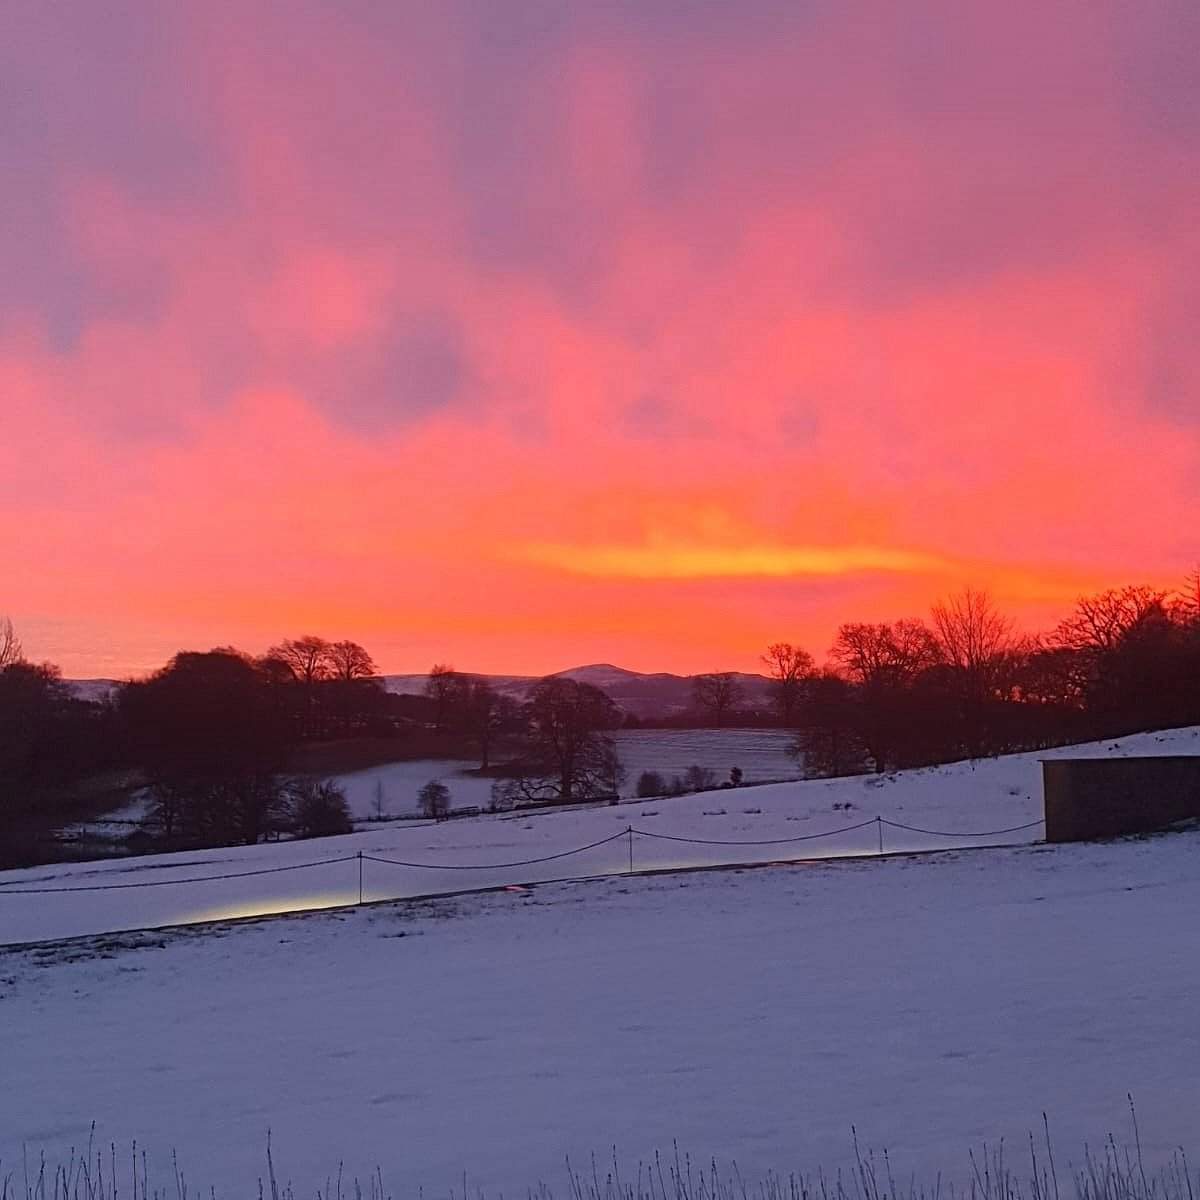 💗𝐏𝐑𝐄𝐓𝐓𝐘 𝐈𝐍 𝐏𝐈𝐍𝐊💗 What a way to wake up at The Coniston this morning! Thanks to our very own Flo for the fab pic! 👏 #theconistonhotel #conistonhotel #yorkshire #yorkshiredales #hotel #restaurant #spa #sunrise #morning #snow #pinksky